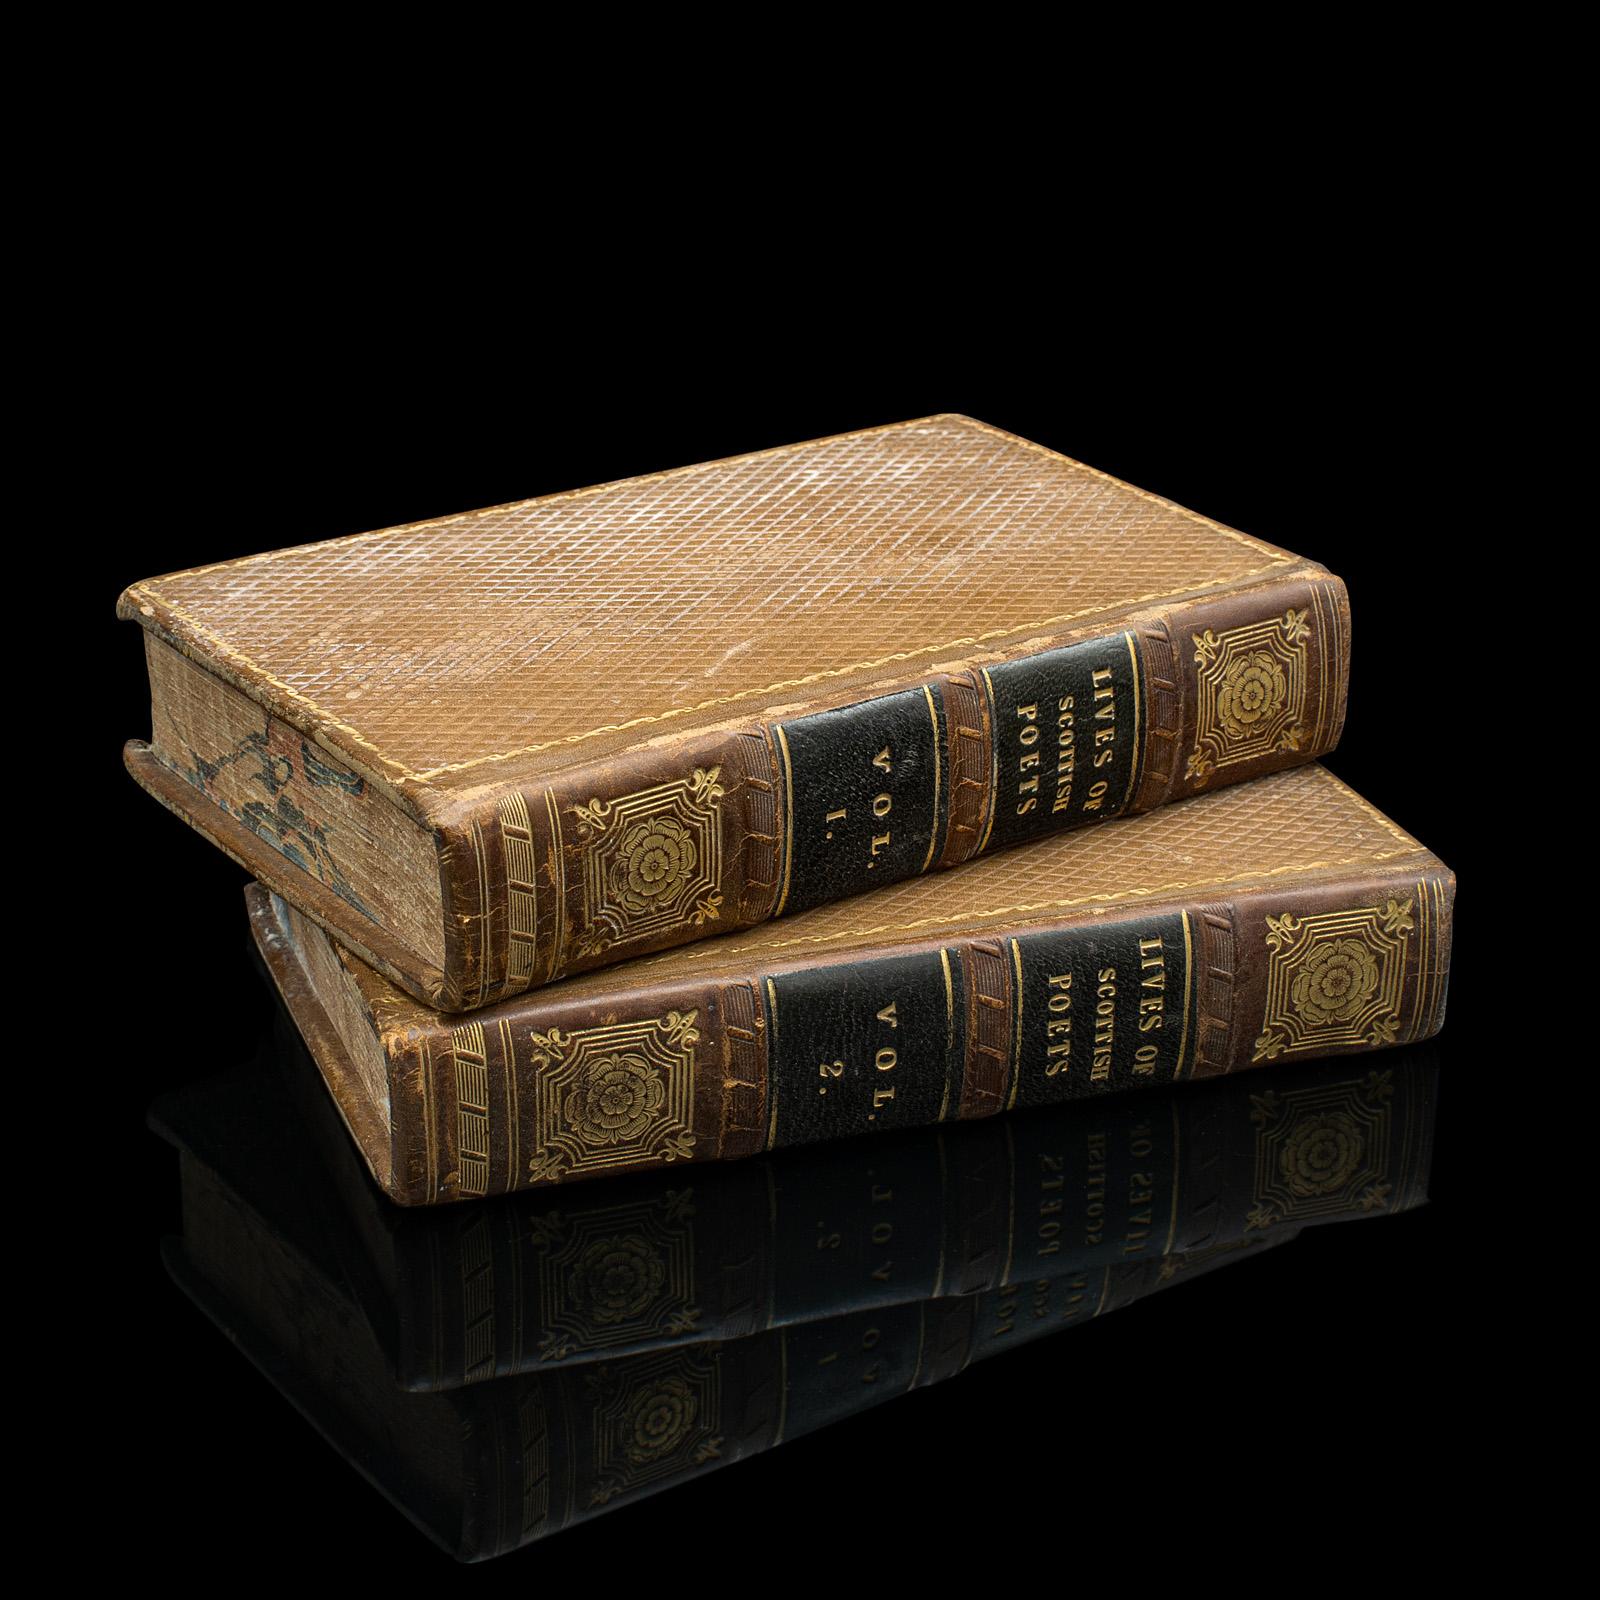 This is a 2 volume antique book set, The Lives of Scottish Poets. An English language biographical work, dating to the Regency period, published 1821.

Presented in good antique condition, intact and lightly time-worn
Hard bound with textured